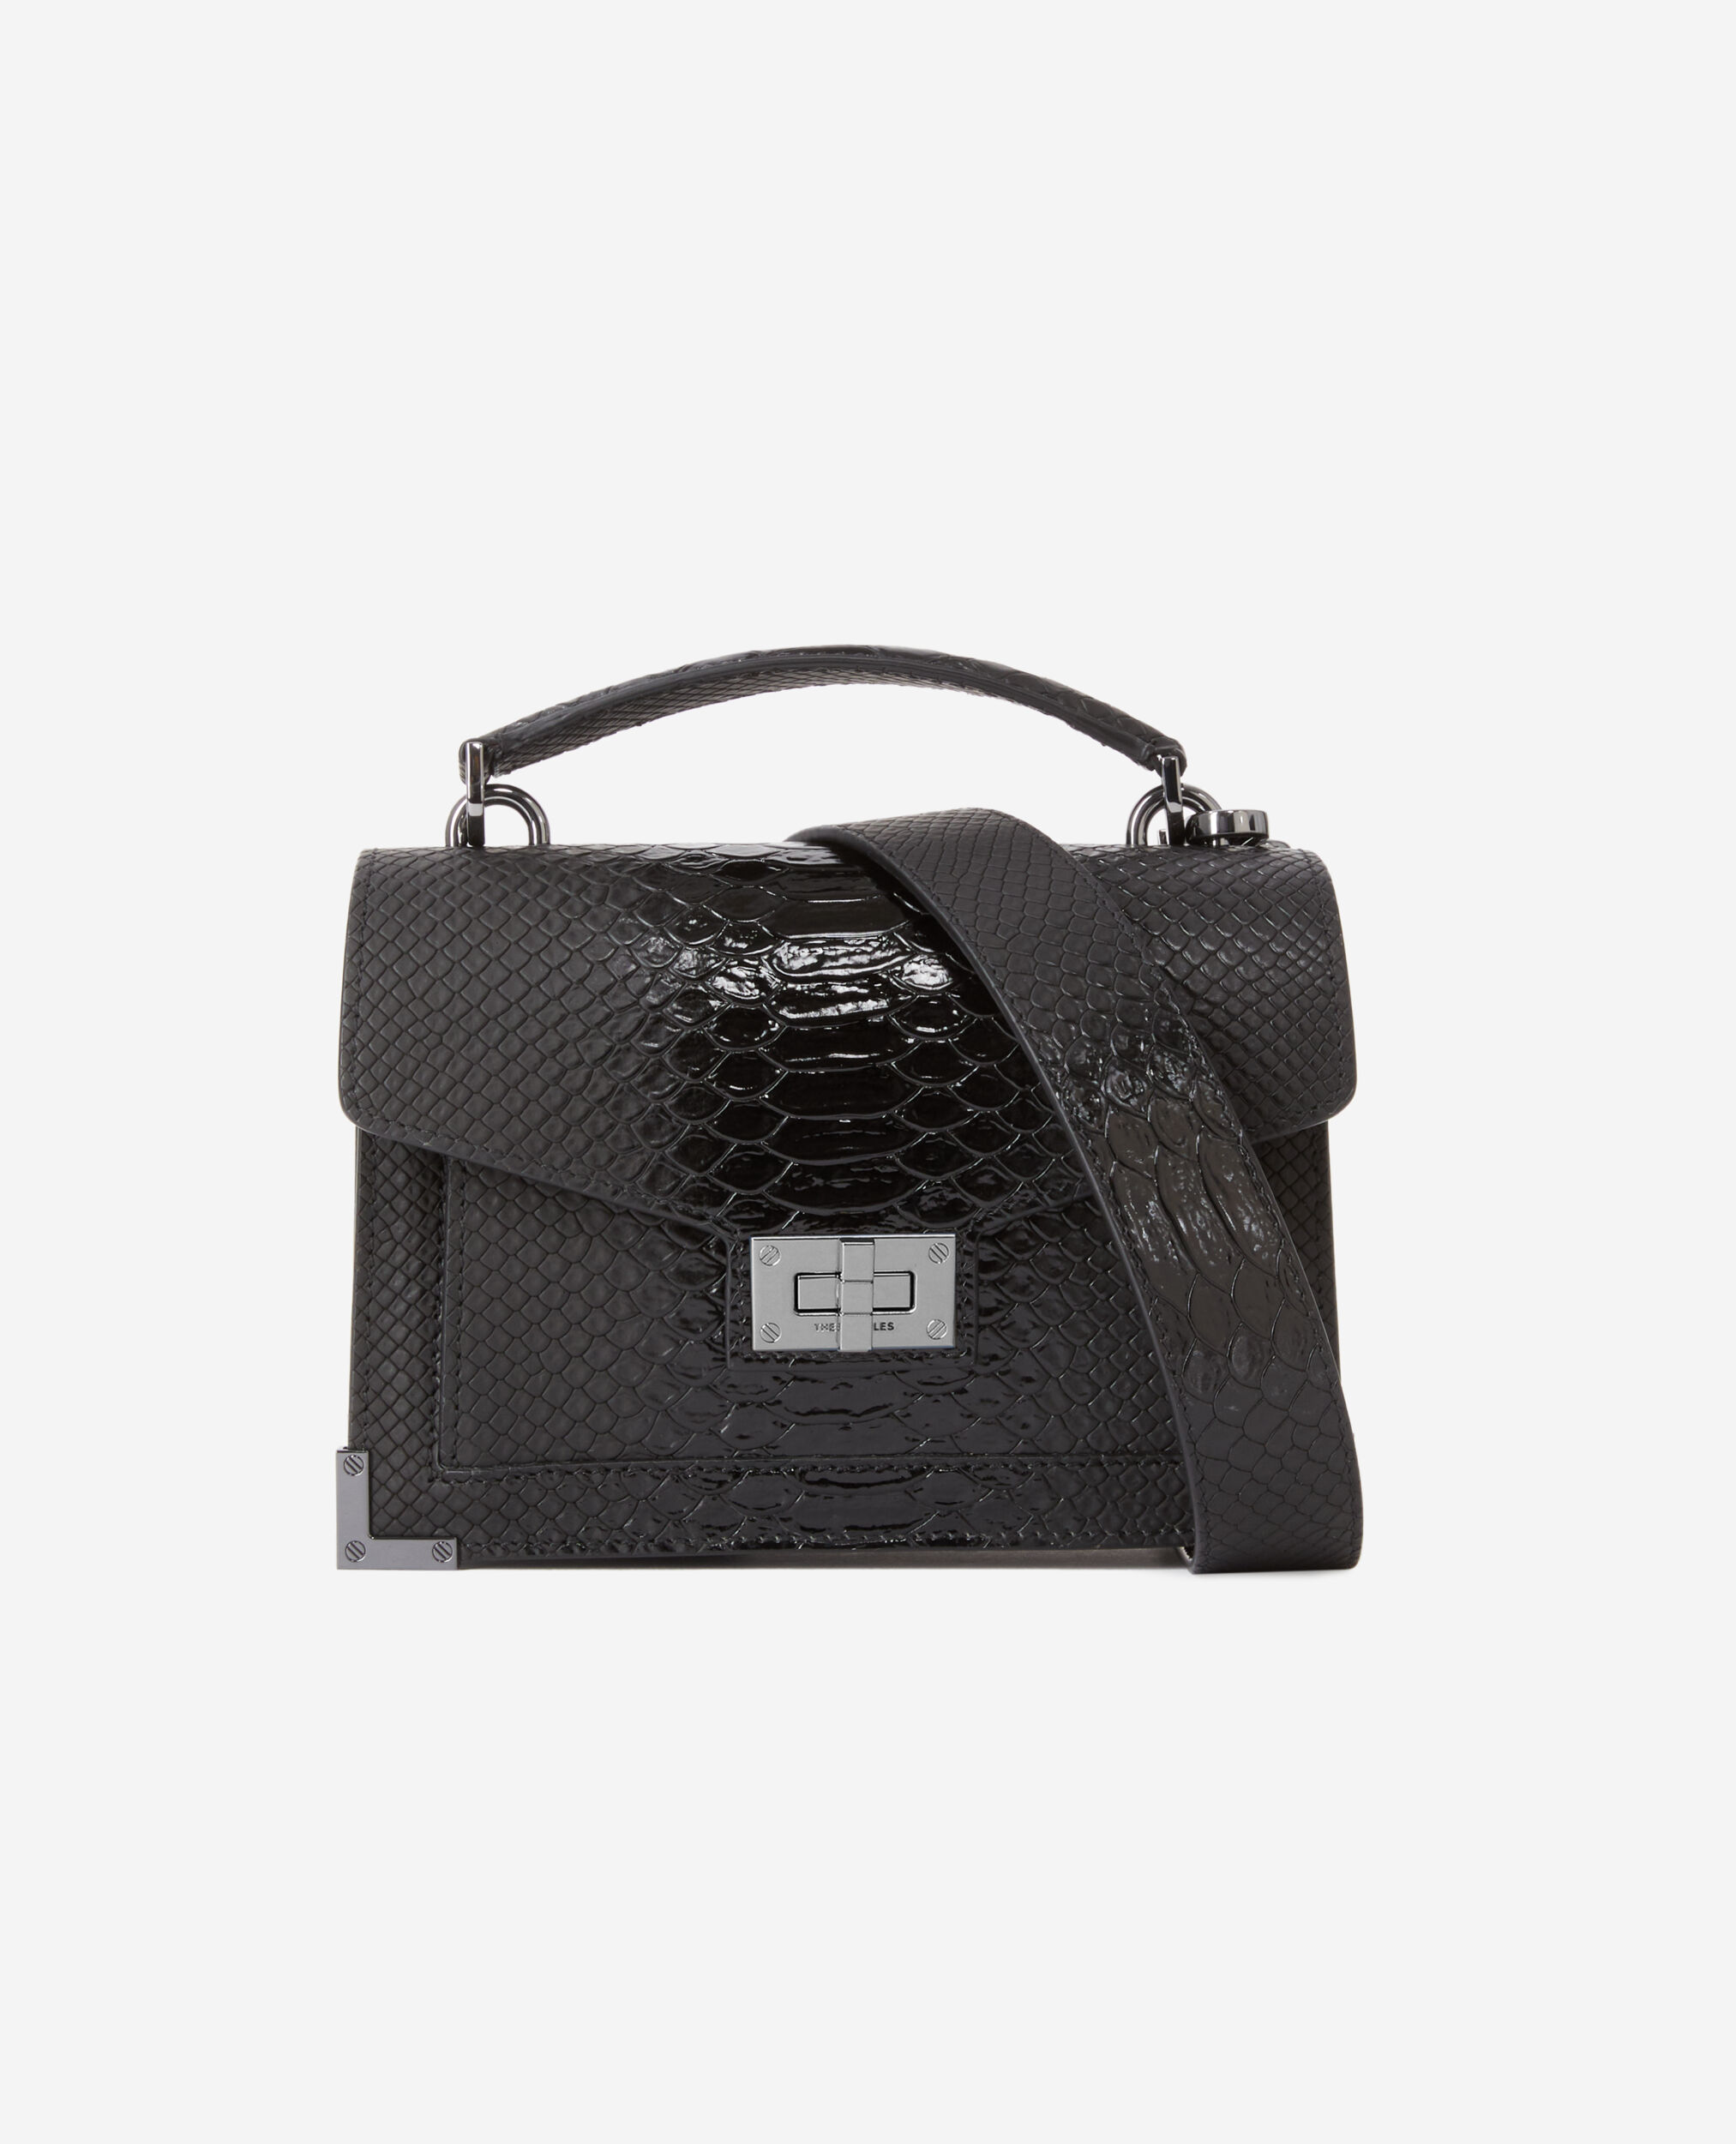 Introducing: The Emily Bag By The Kooples - PurseBlog